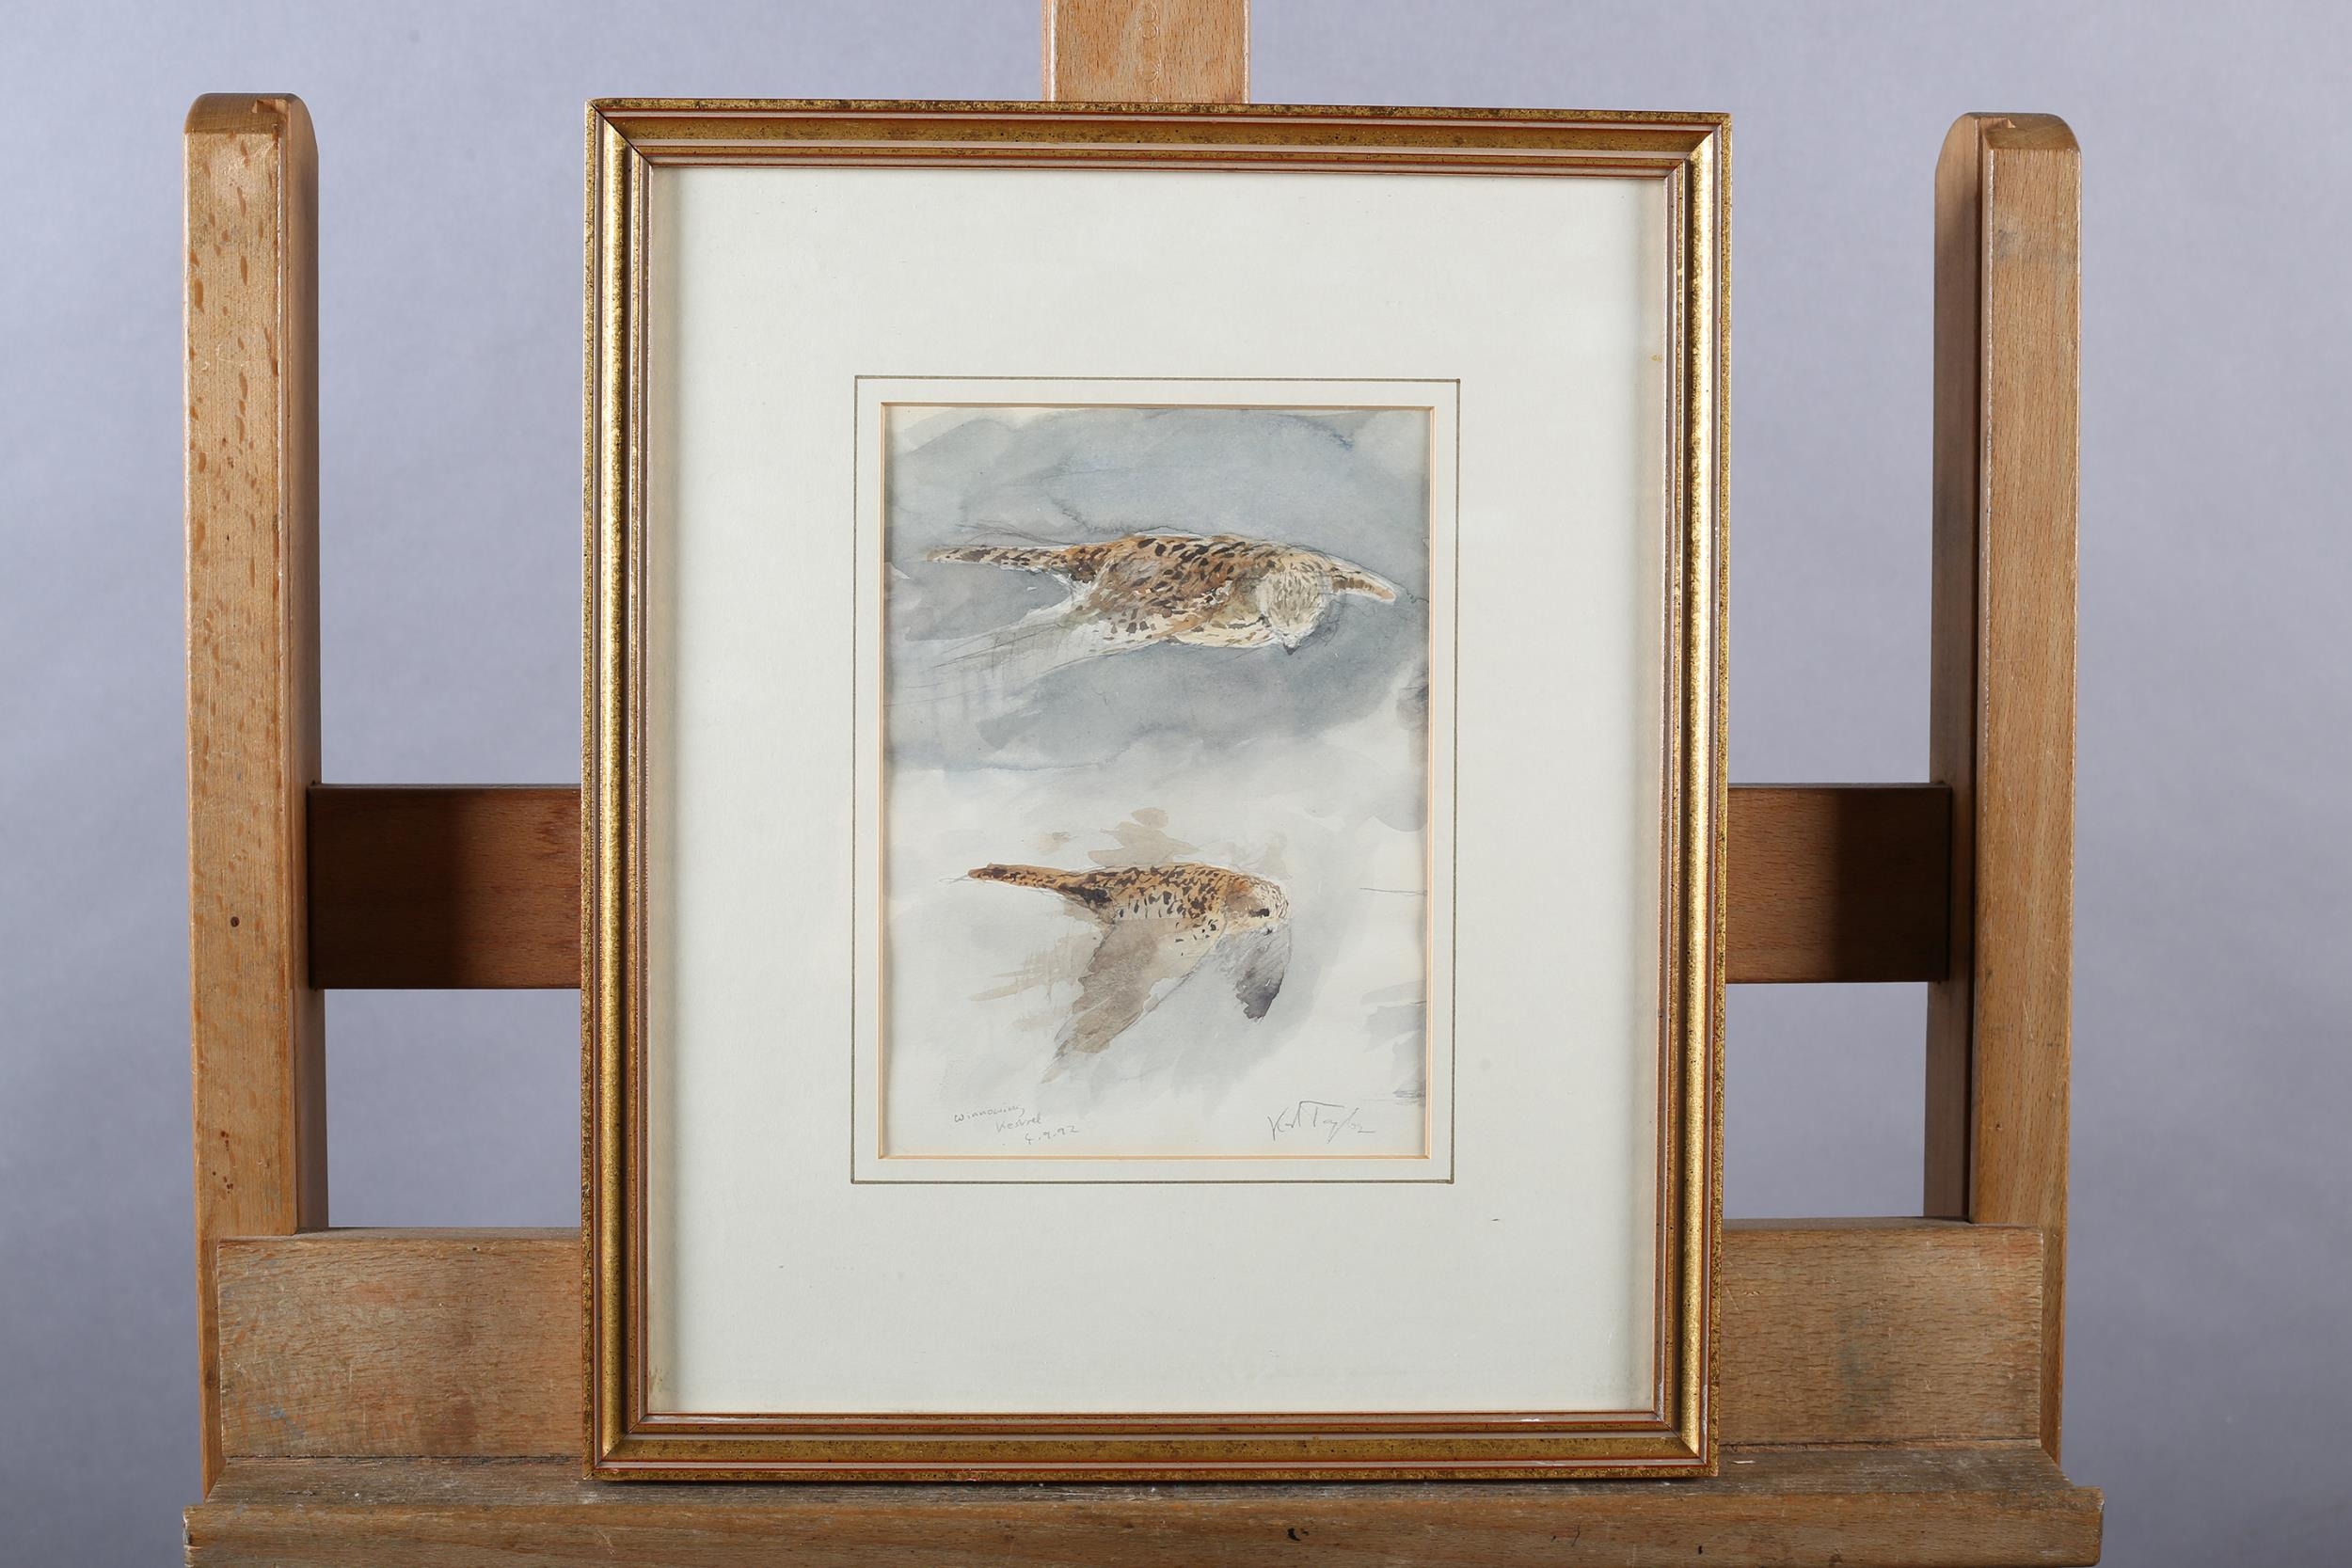 ARR Karl Taylor (b 1964), Winnowing Kestrel, watercolour over pencil, signed to lower right,